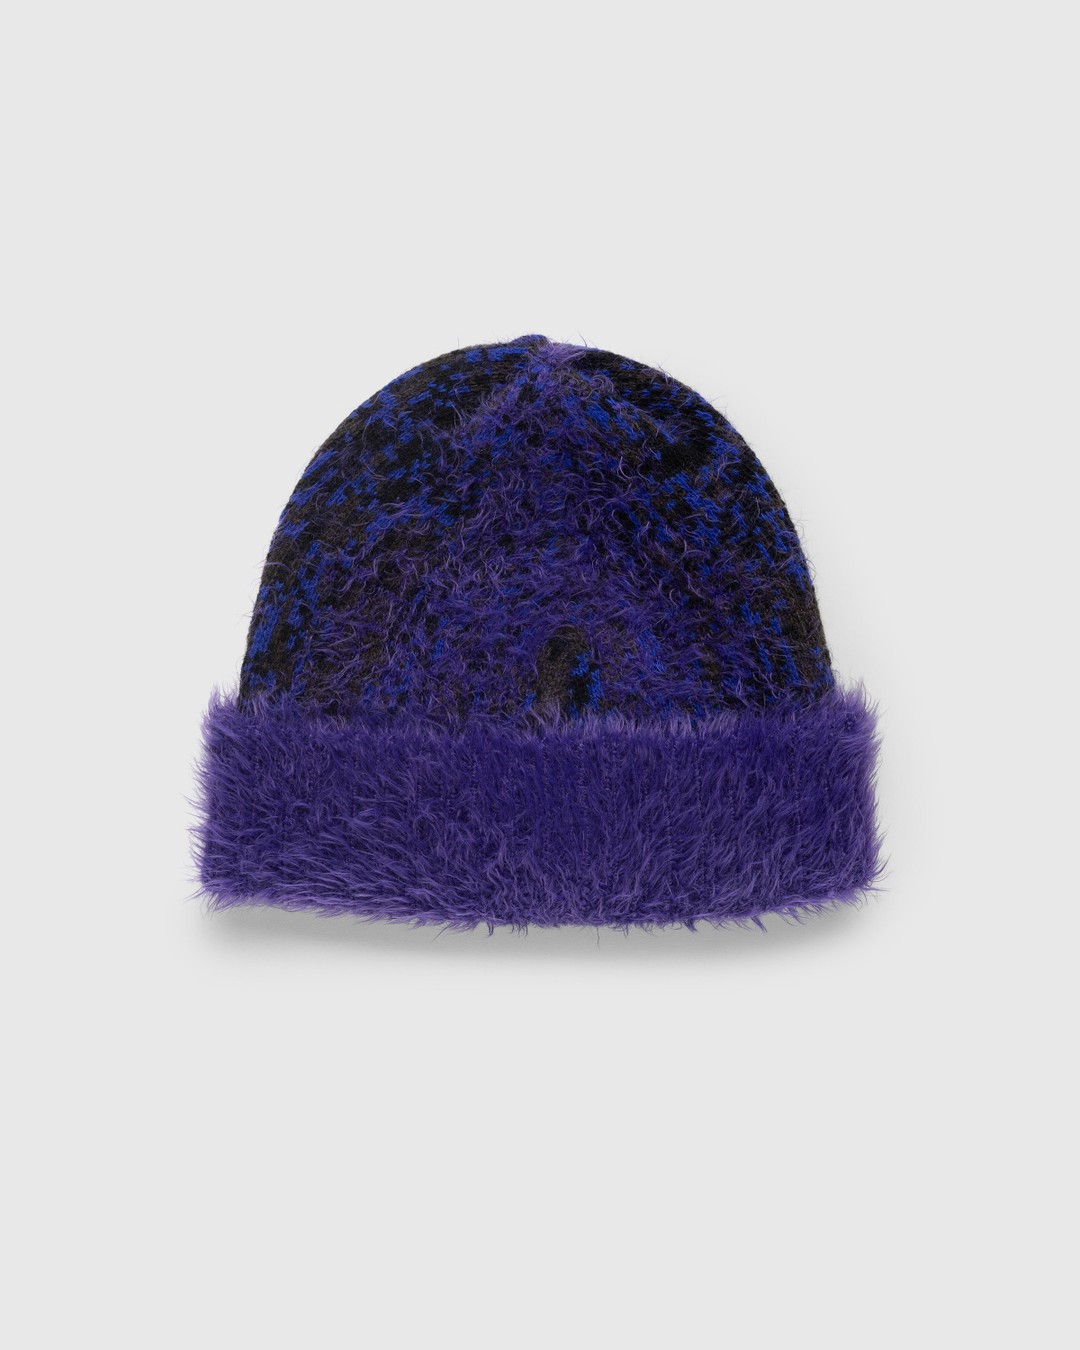 Y/Project – Gradient Hairy Knit Beanie Purple/Blue/Brown - Hats - Multi - Image 1